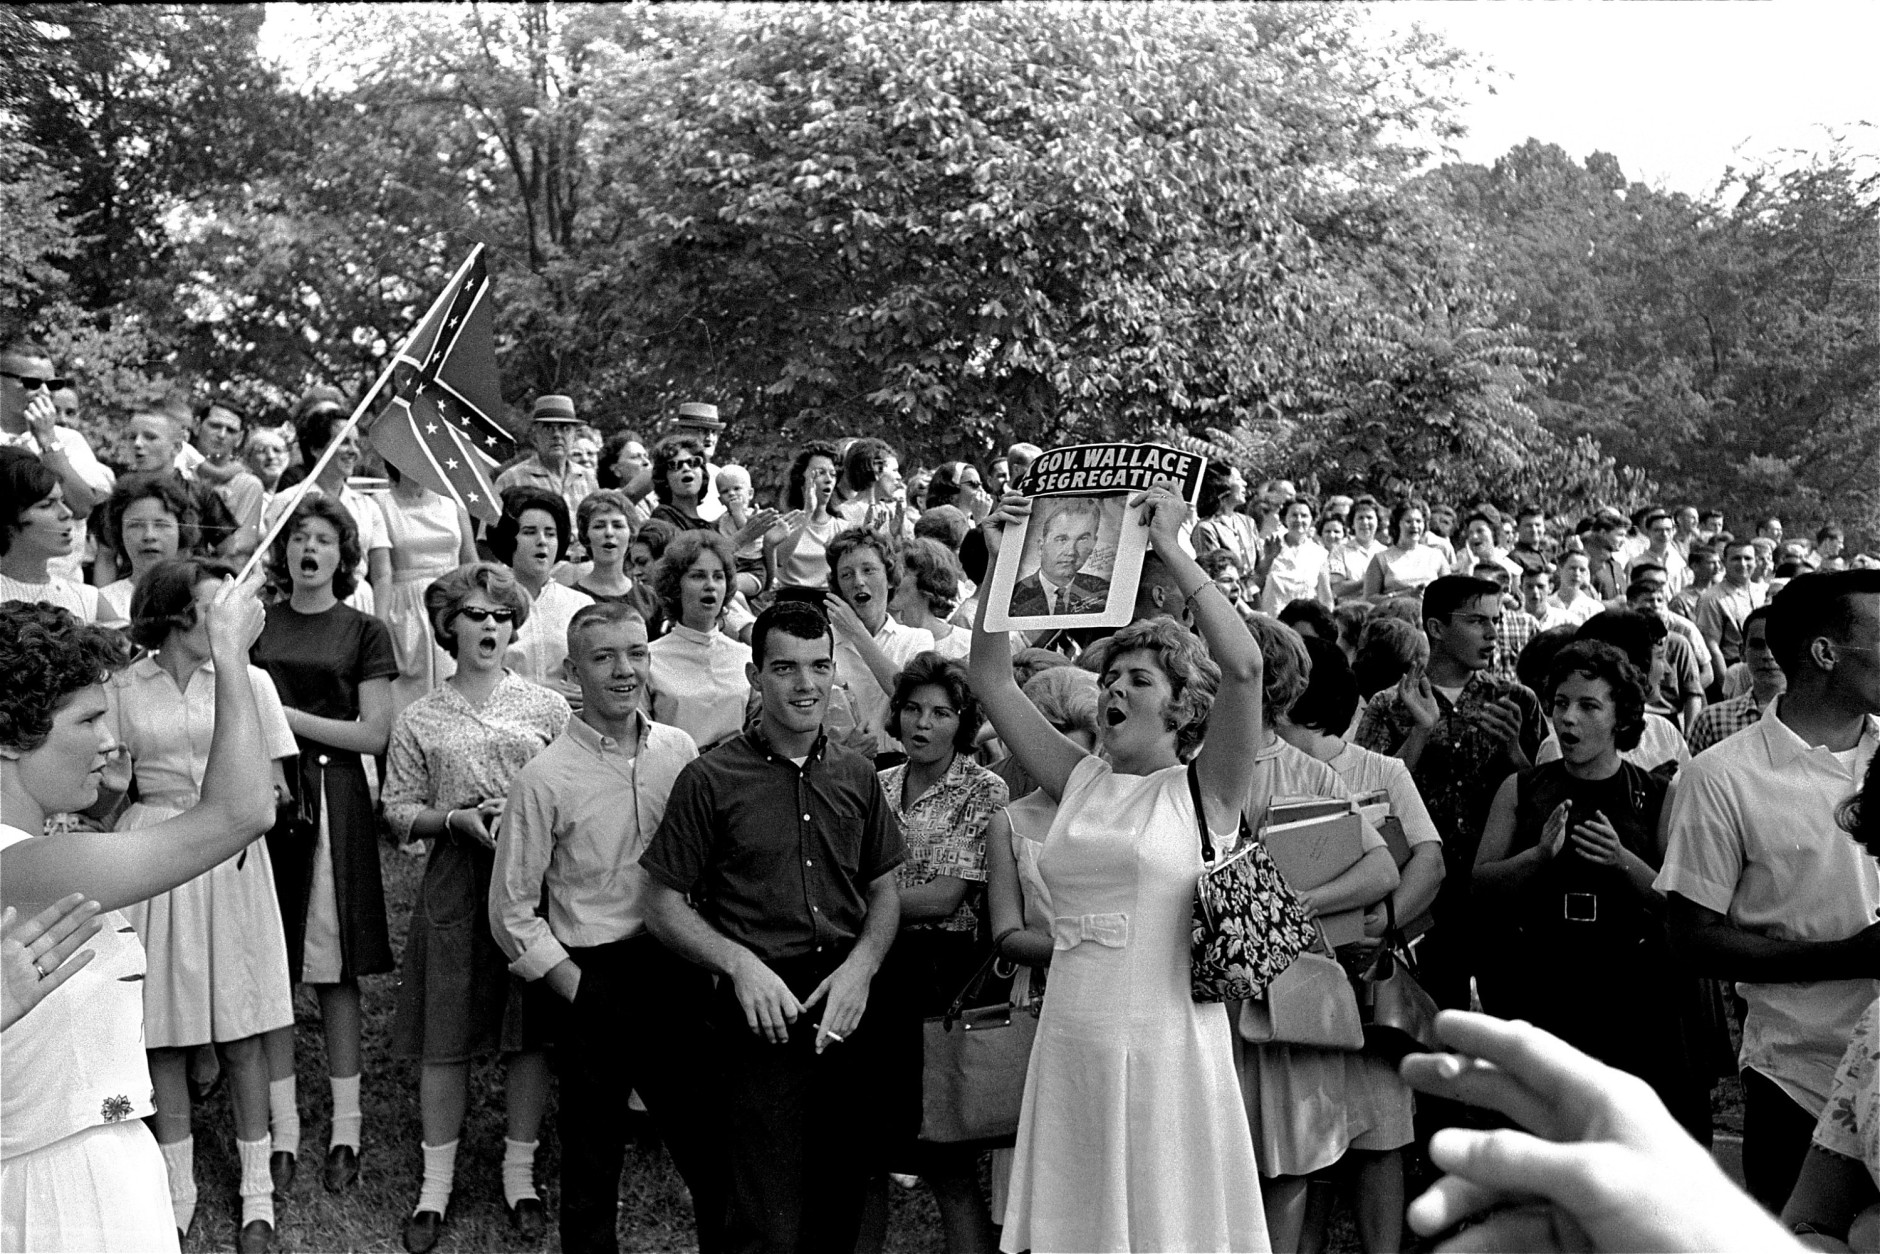 On this date in 1963, 20 black students entered Alabama public schools following a standoff between federal authorities and Gov. George C. Wallace. Here, students West End High yell, wave flags and a picture of Wallace as they demonstrate at Birmingham, Ala., following admittance of two black students, Sept. 10, 1963.  (AP Photo/stf)